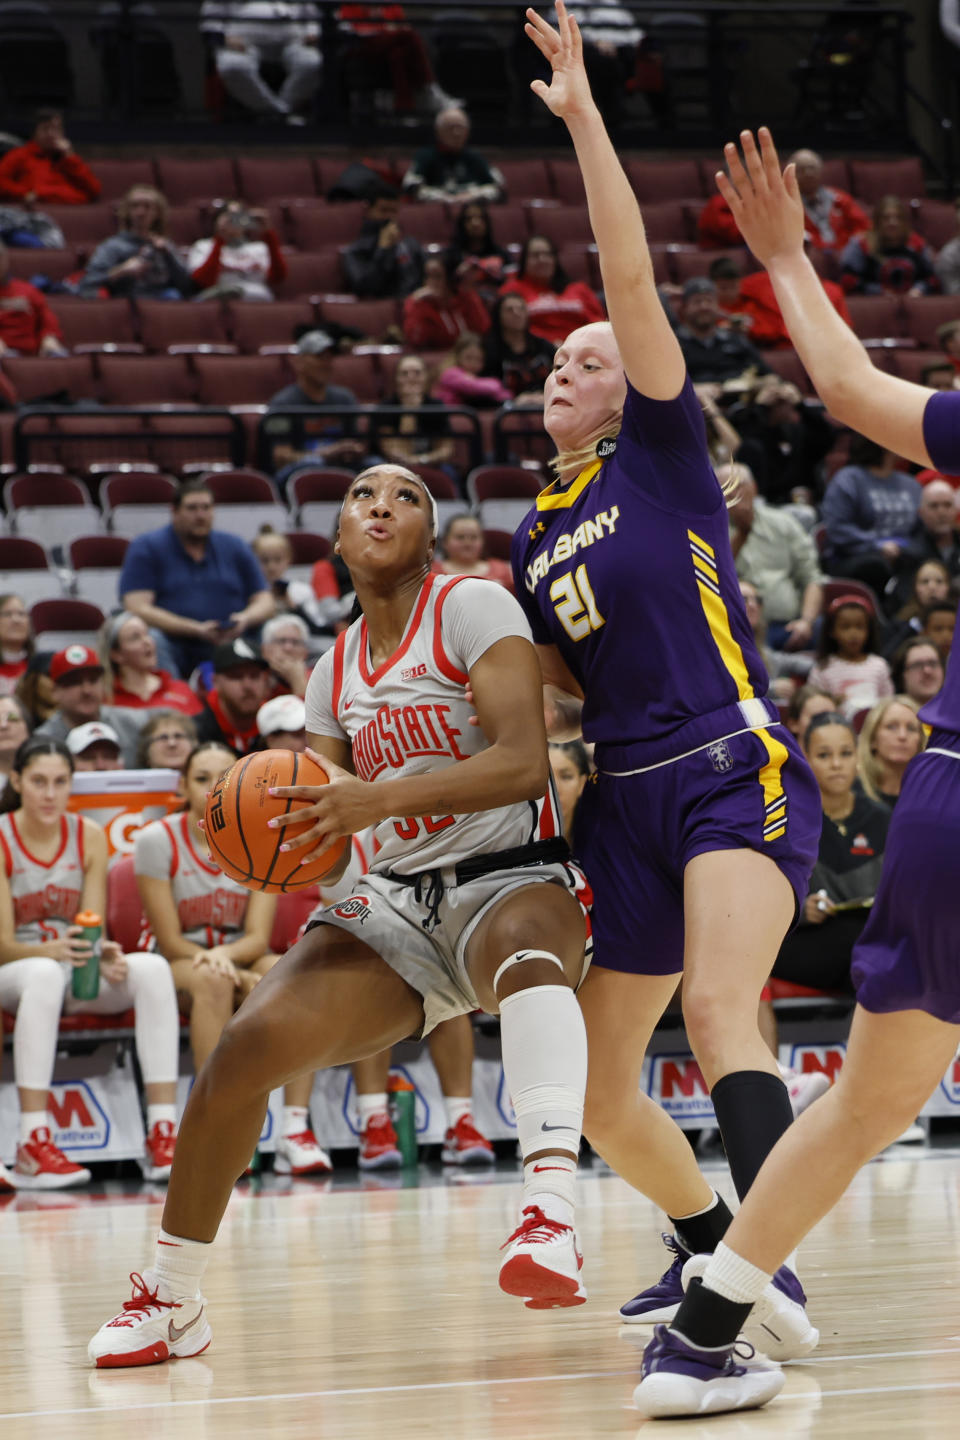 Ohio State's Cotie McMahon, left, looks for an open shot as Albany's Helene Haegerstrand defends during the second half of an NCAA college basketball game on Friday, Dec. 16, 2022, in Columbus, Ohio. (AP Photo/Jay LaPrete)